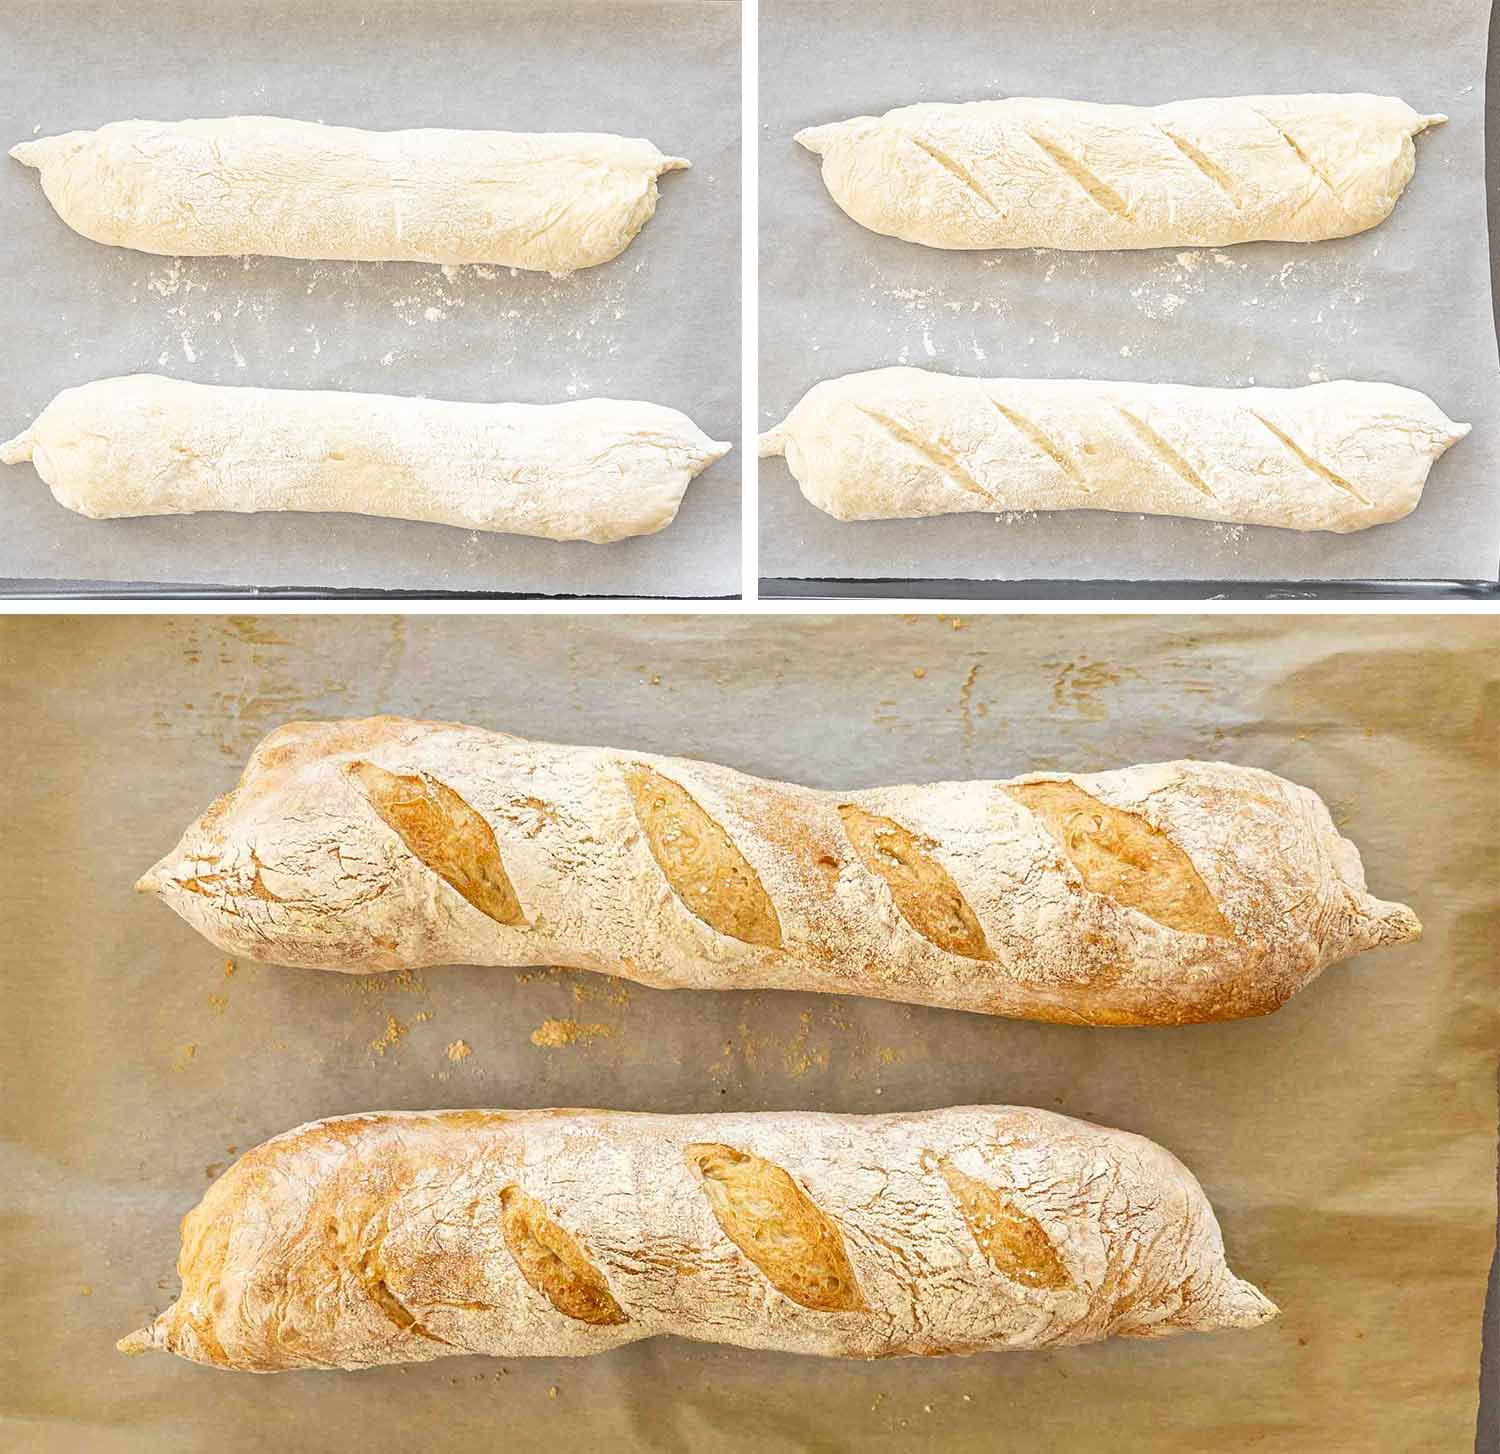 process shots showing how to make no knead baguette.